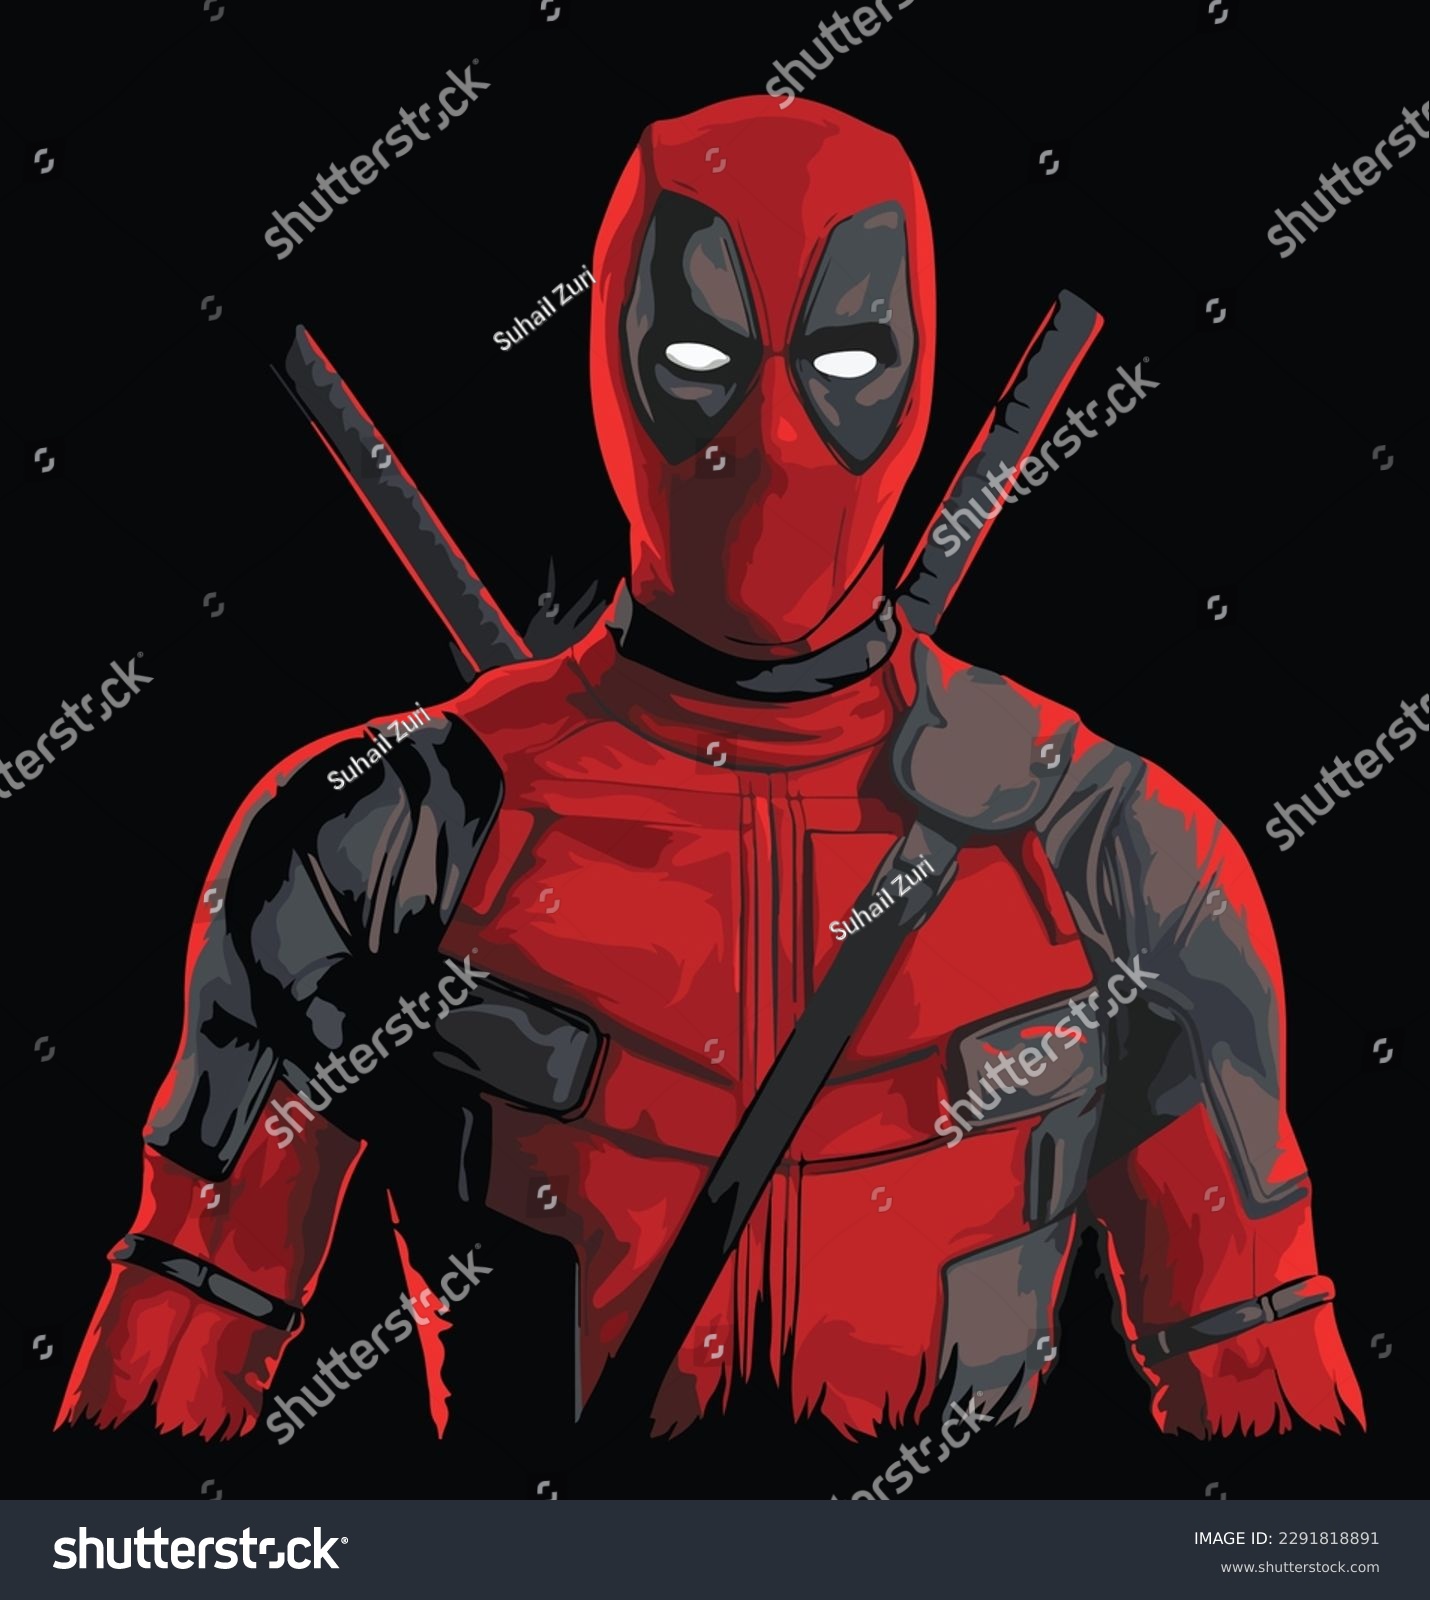 brad vale add pictures of deadpool photo